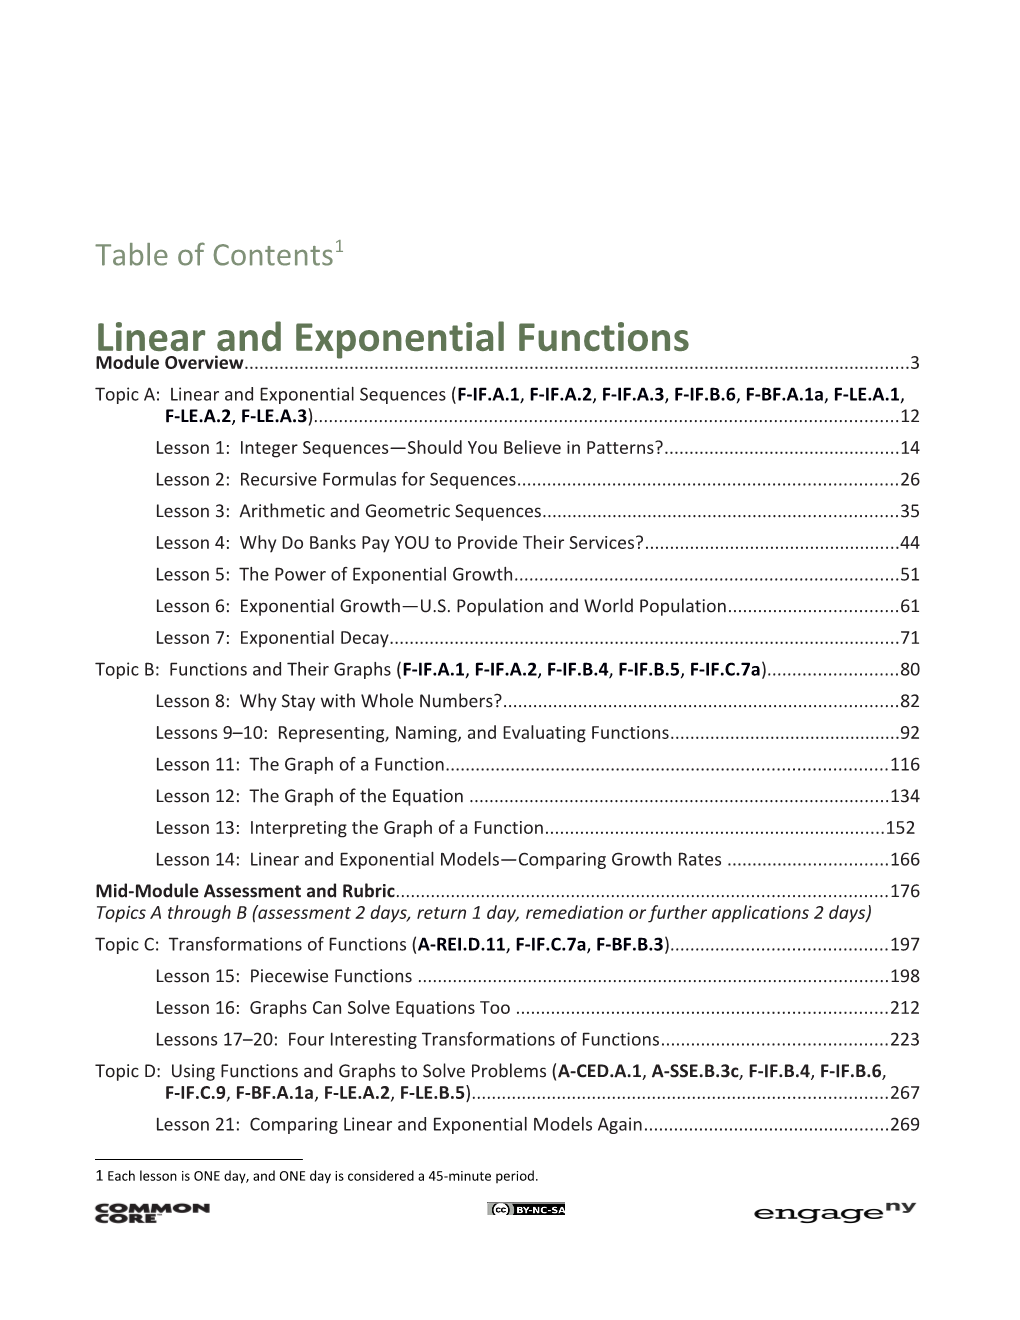 Linear and Exponential Functions